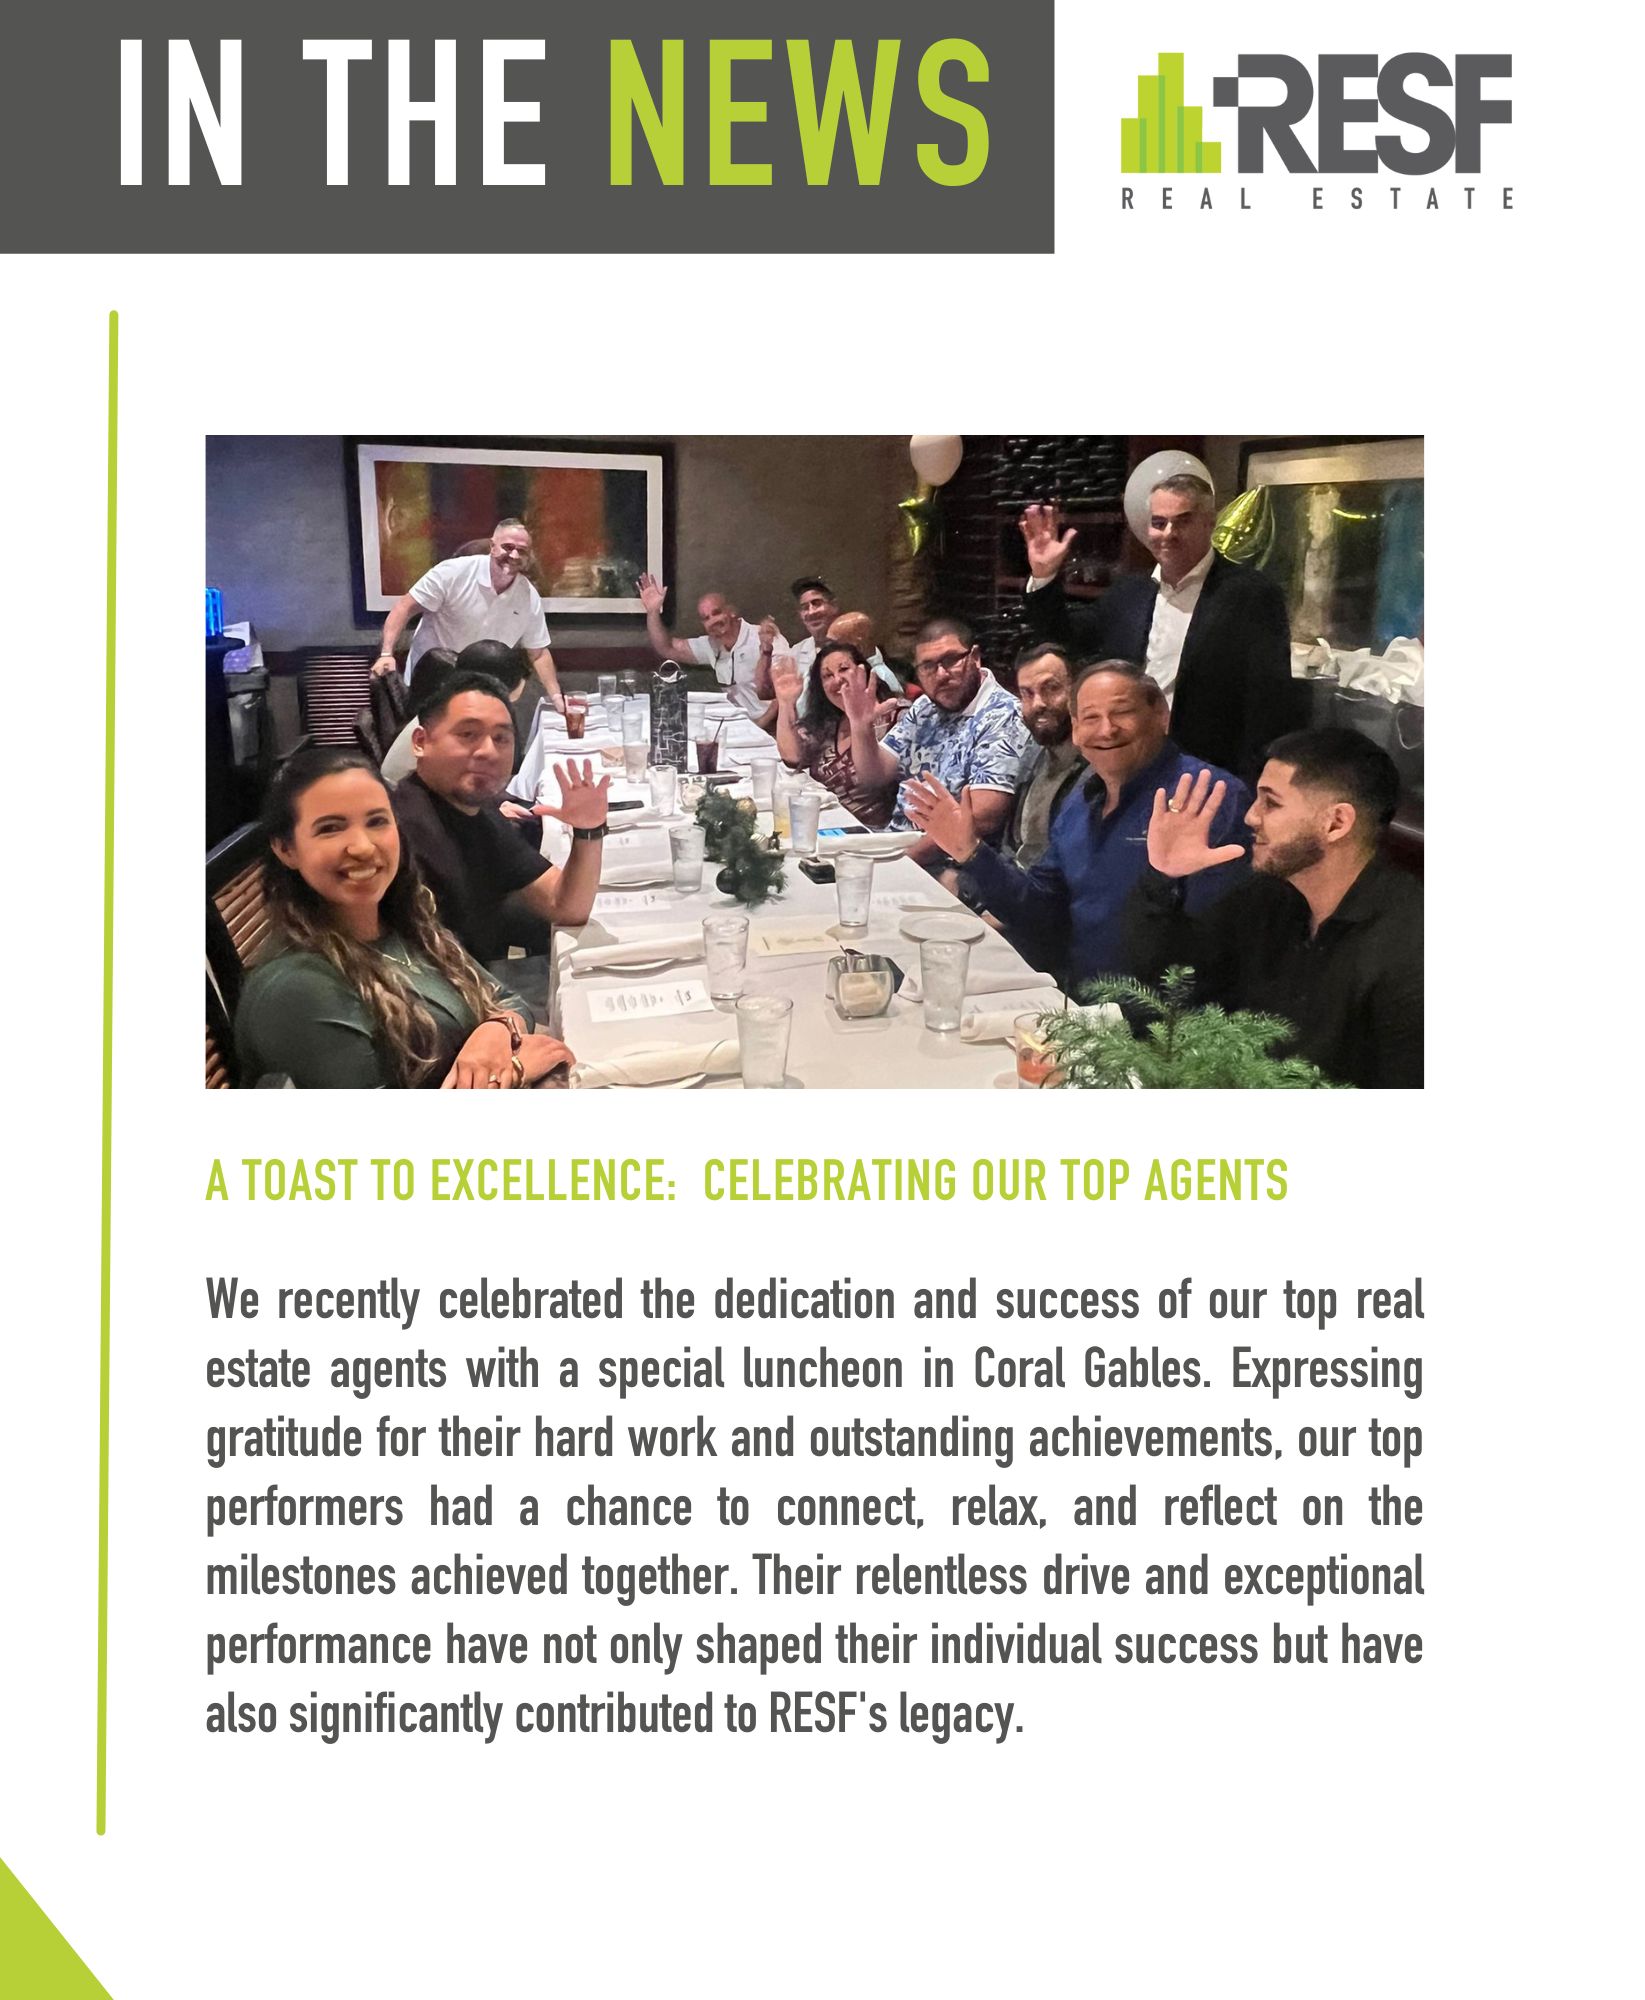 A Toast to Excellence: Celebrating Our Top Agents